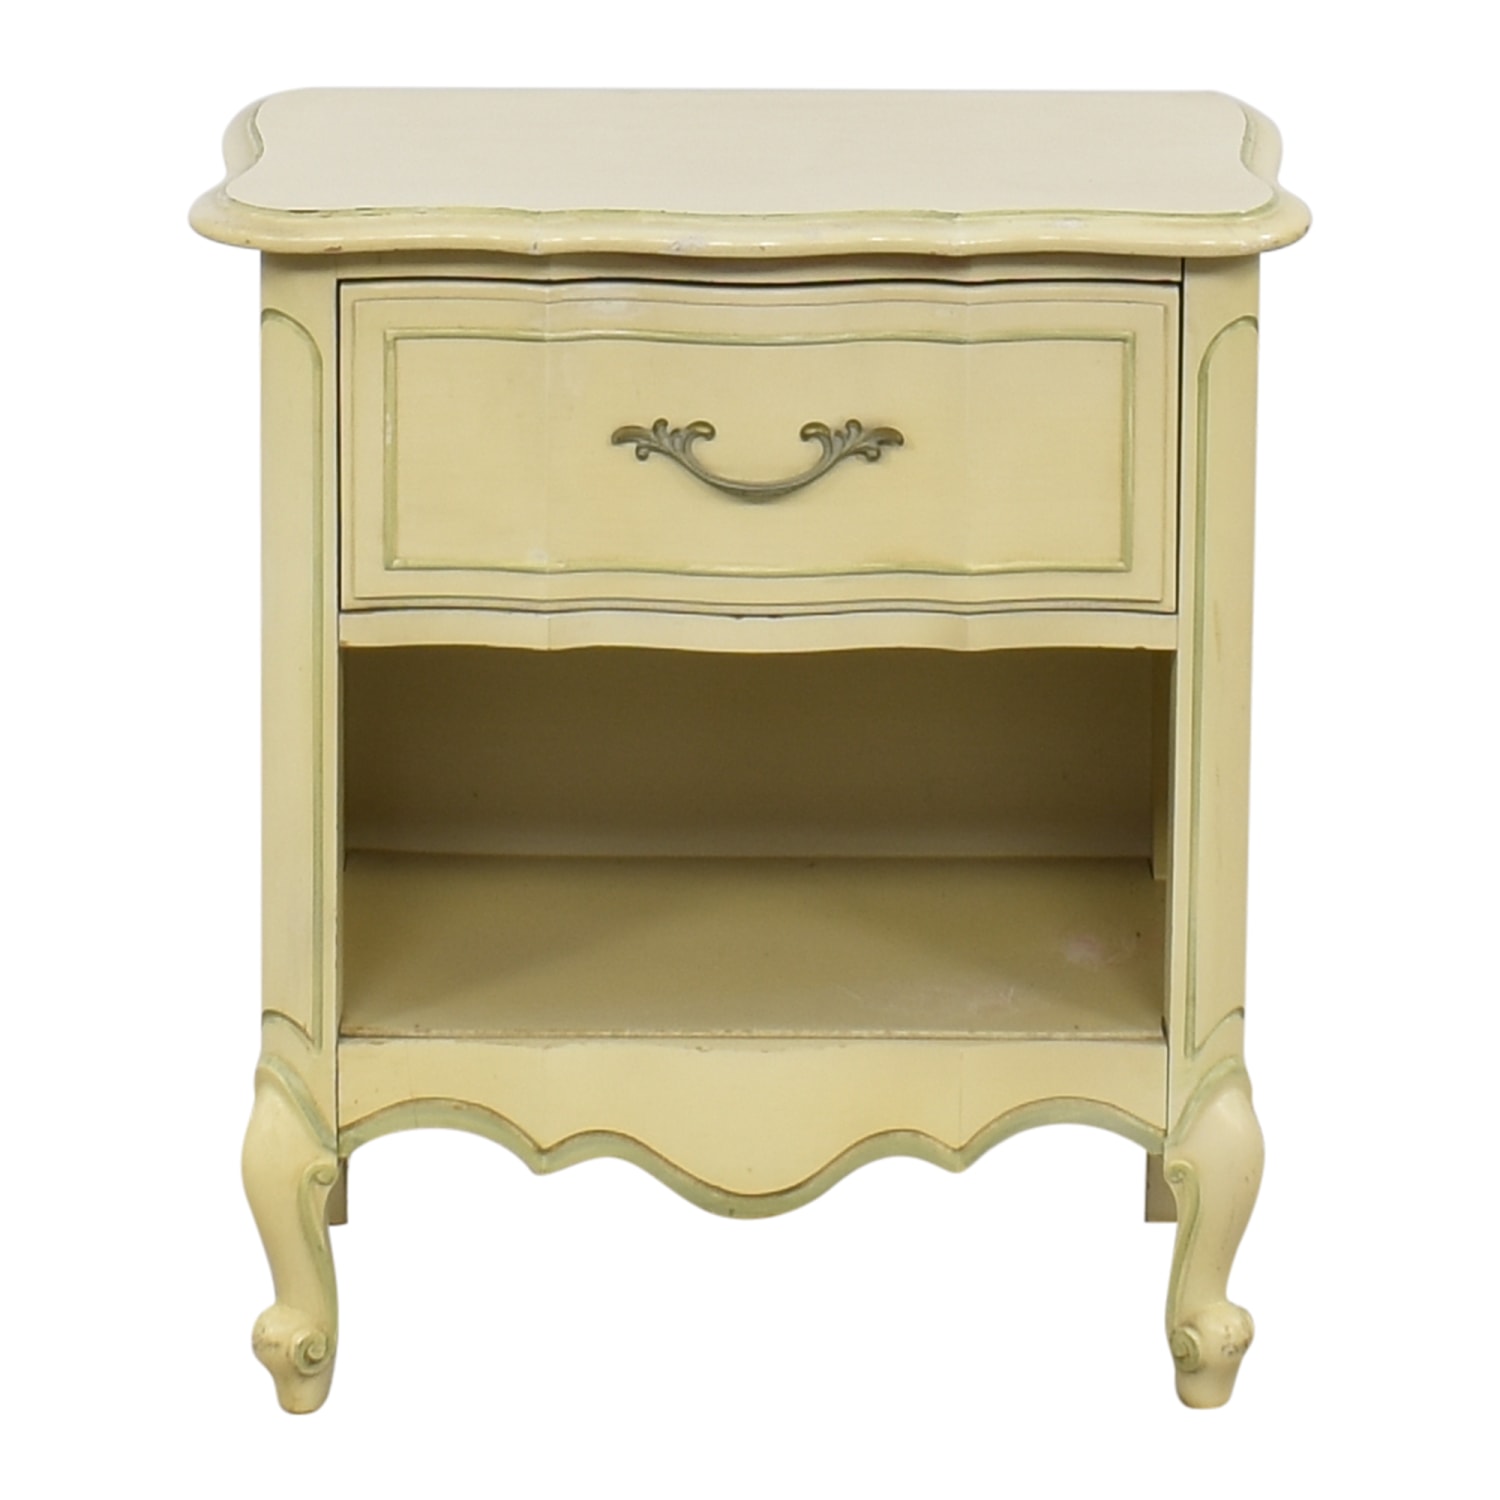  French Provincial Single Drawer Nightstand nj